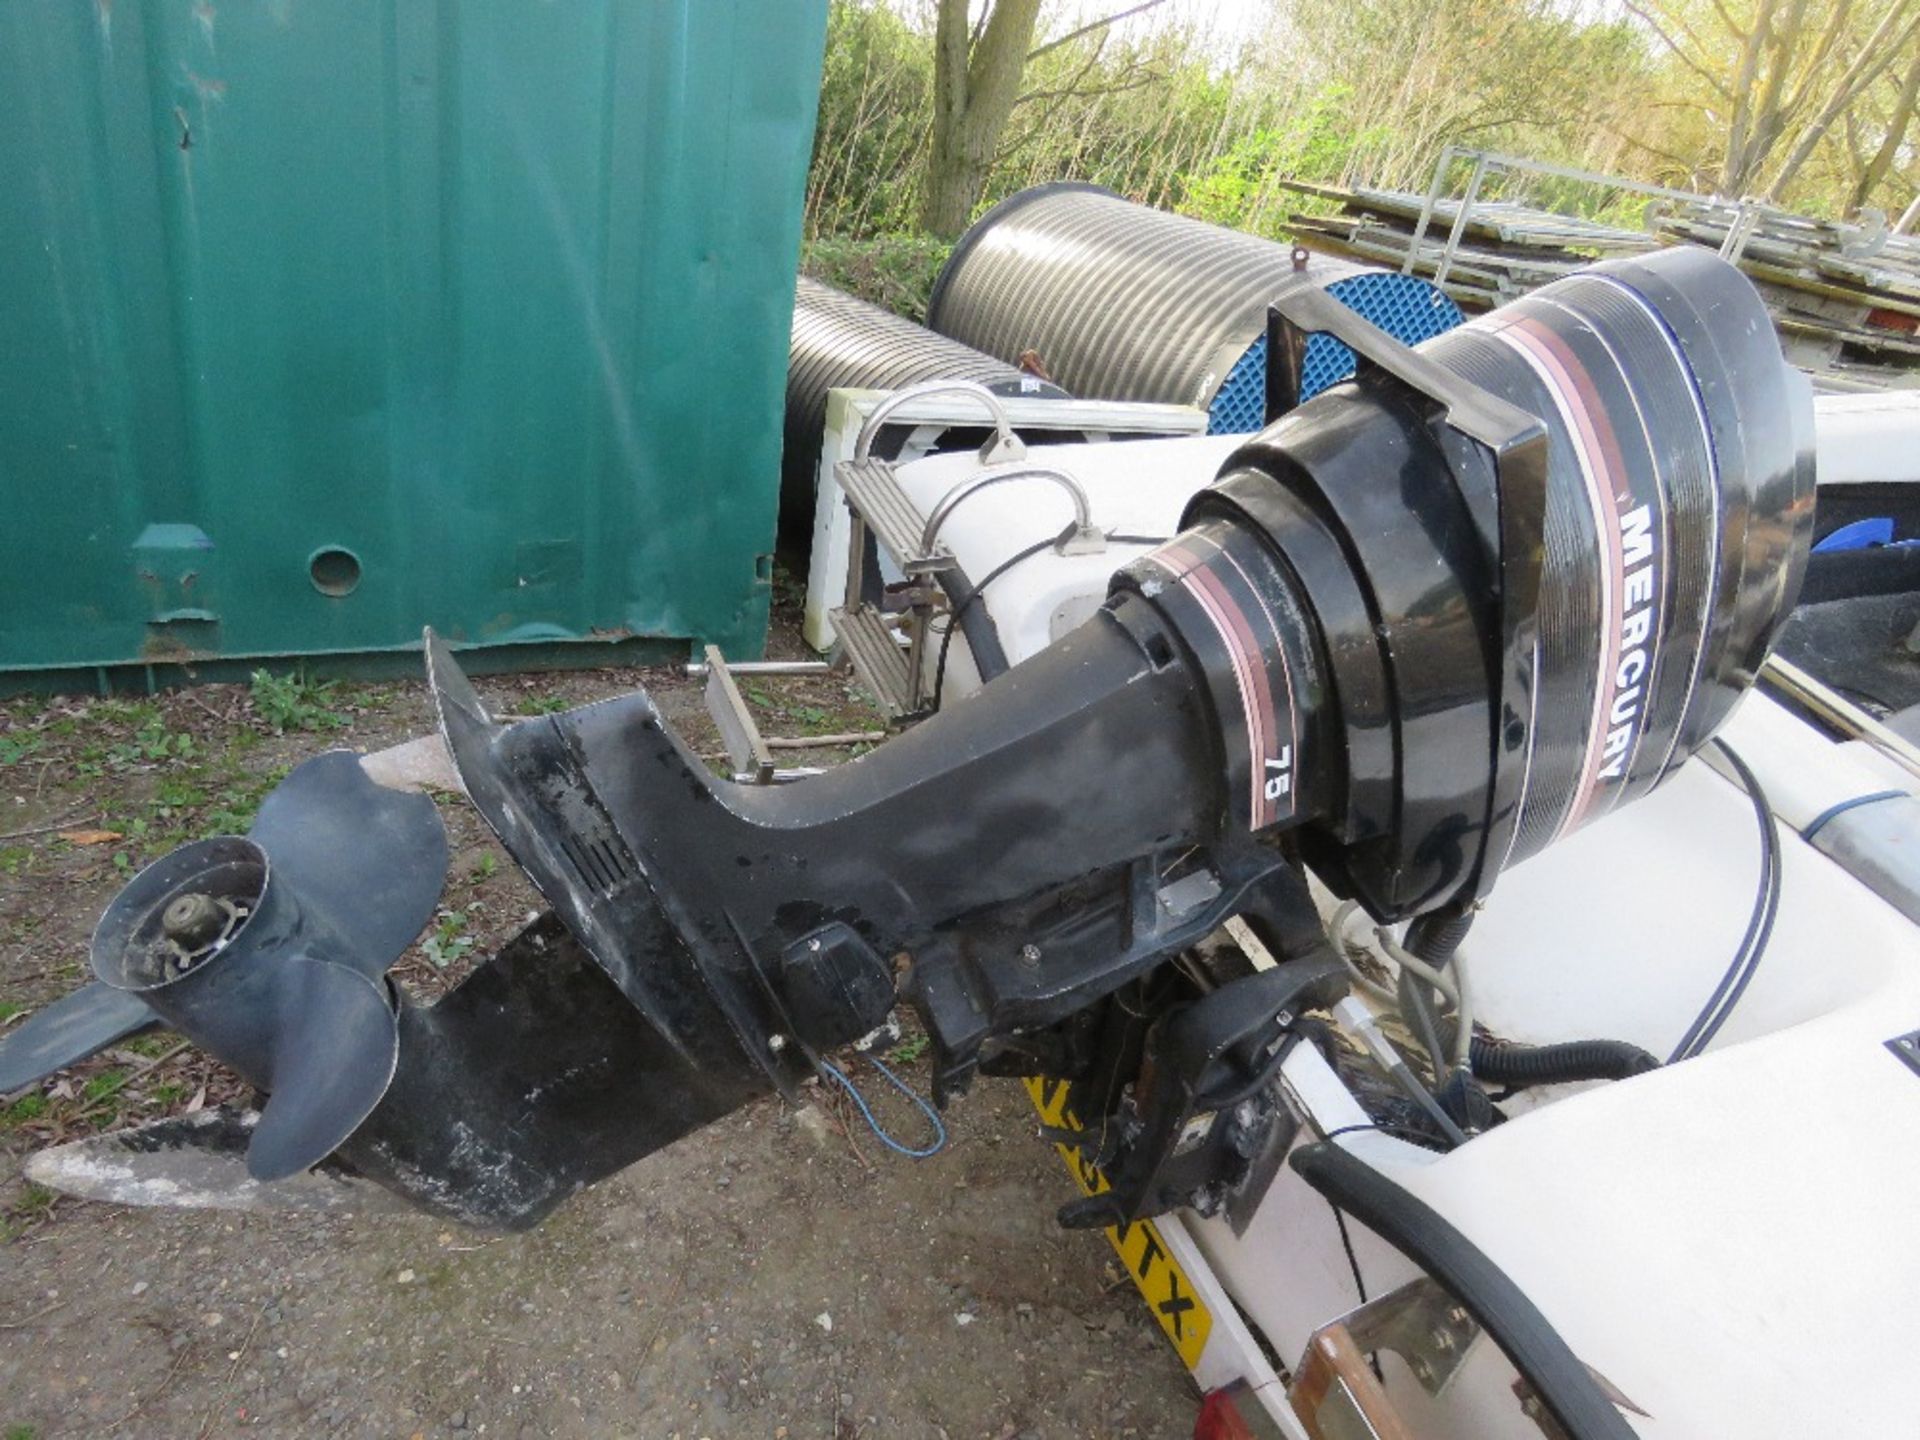 SPEED BOAT, 15FT LENGTH APPROX ON SINGLE AXLE TRAILER (AXLE NEEDS ATTENTION). MERCURY 75HP 2 STROKE - Image 3 of 9